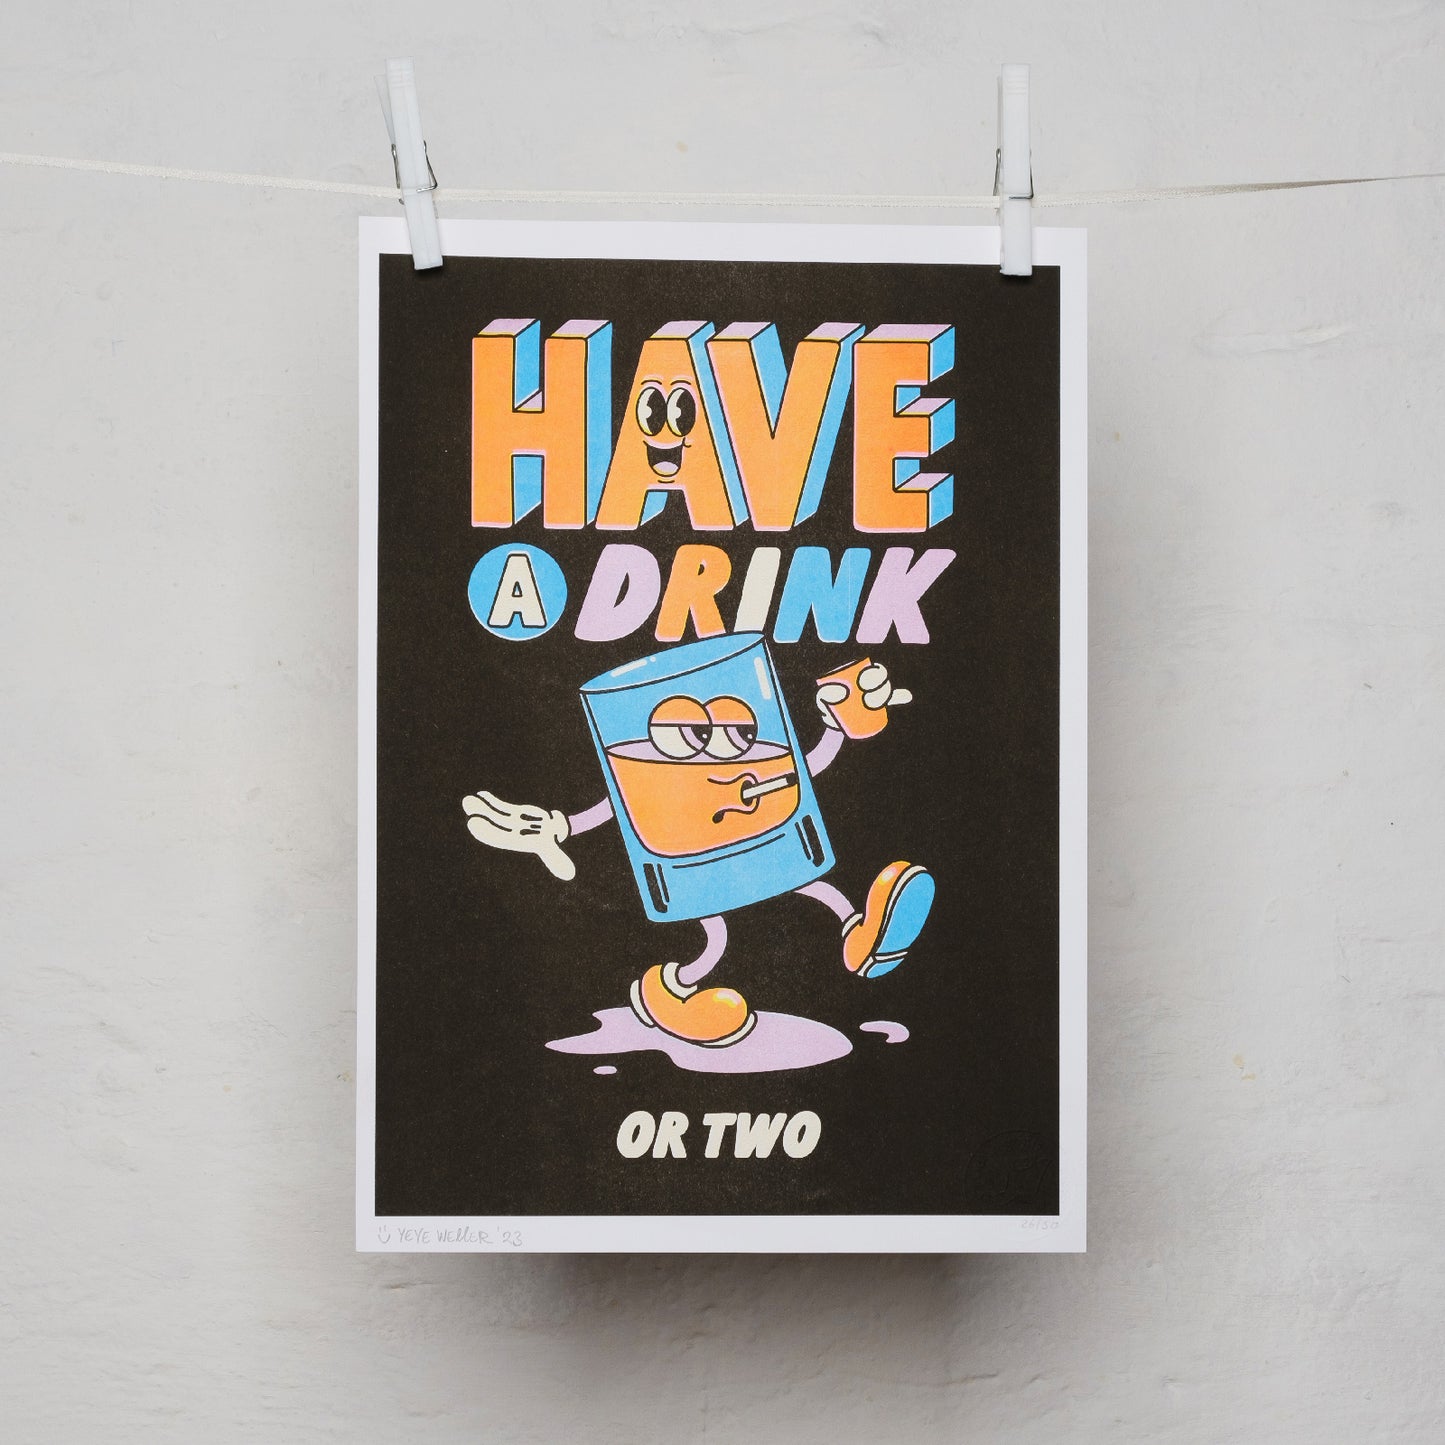 HAVE A DRINK – RISO PRINT